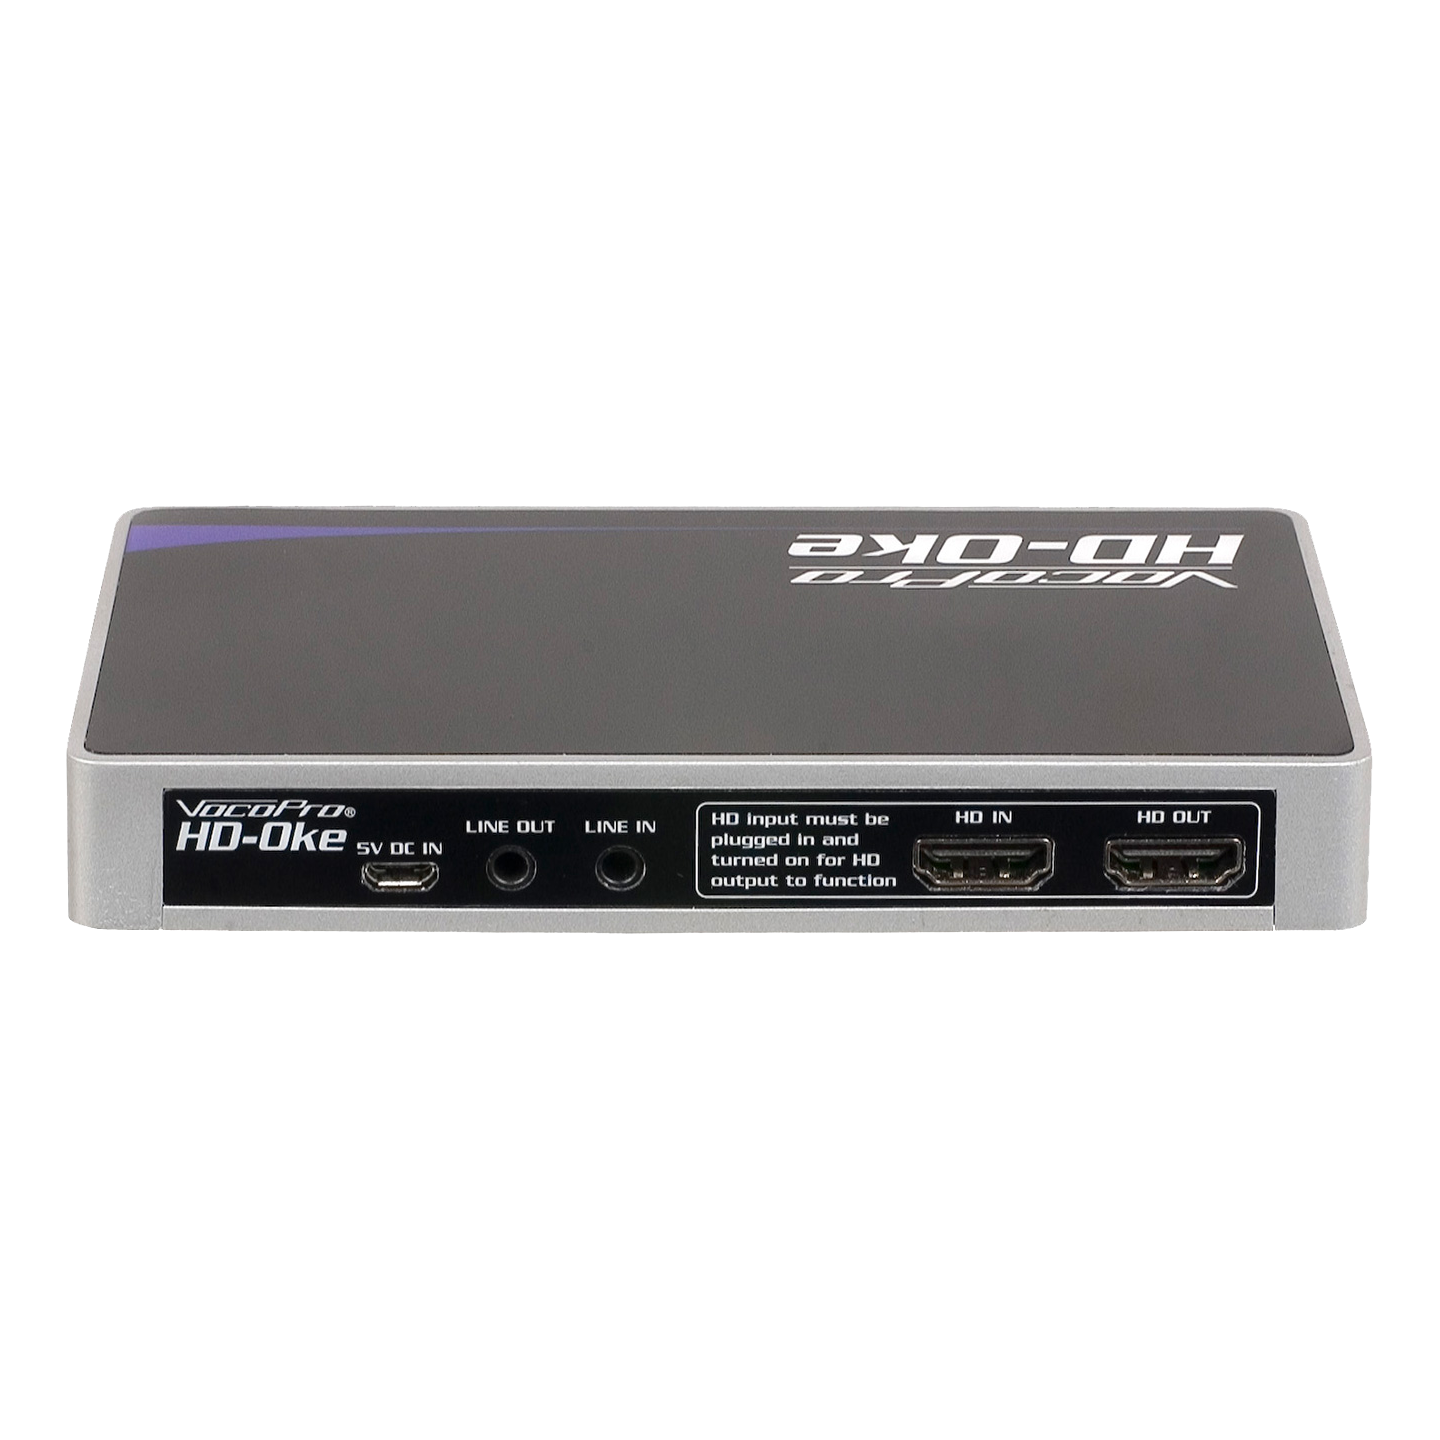 VocoPro HD-Oke Add-On For Sound Bars & Home Theater Systems with HDMI Connections